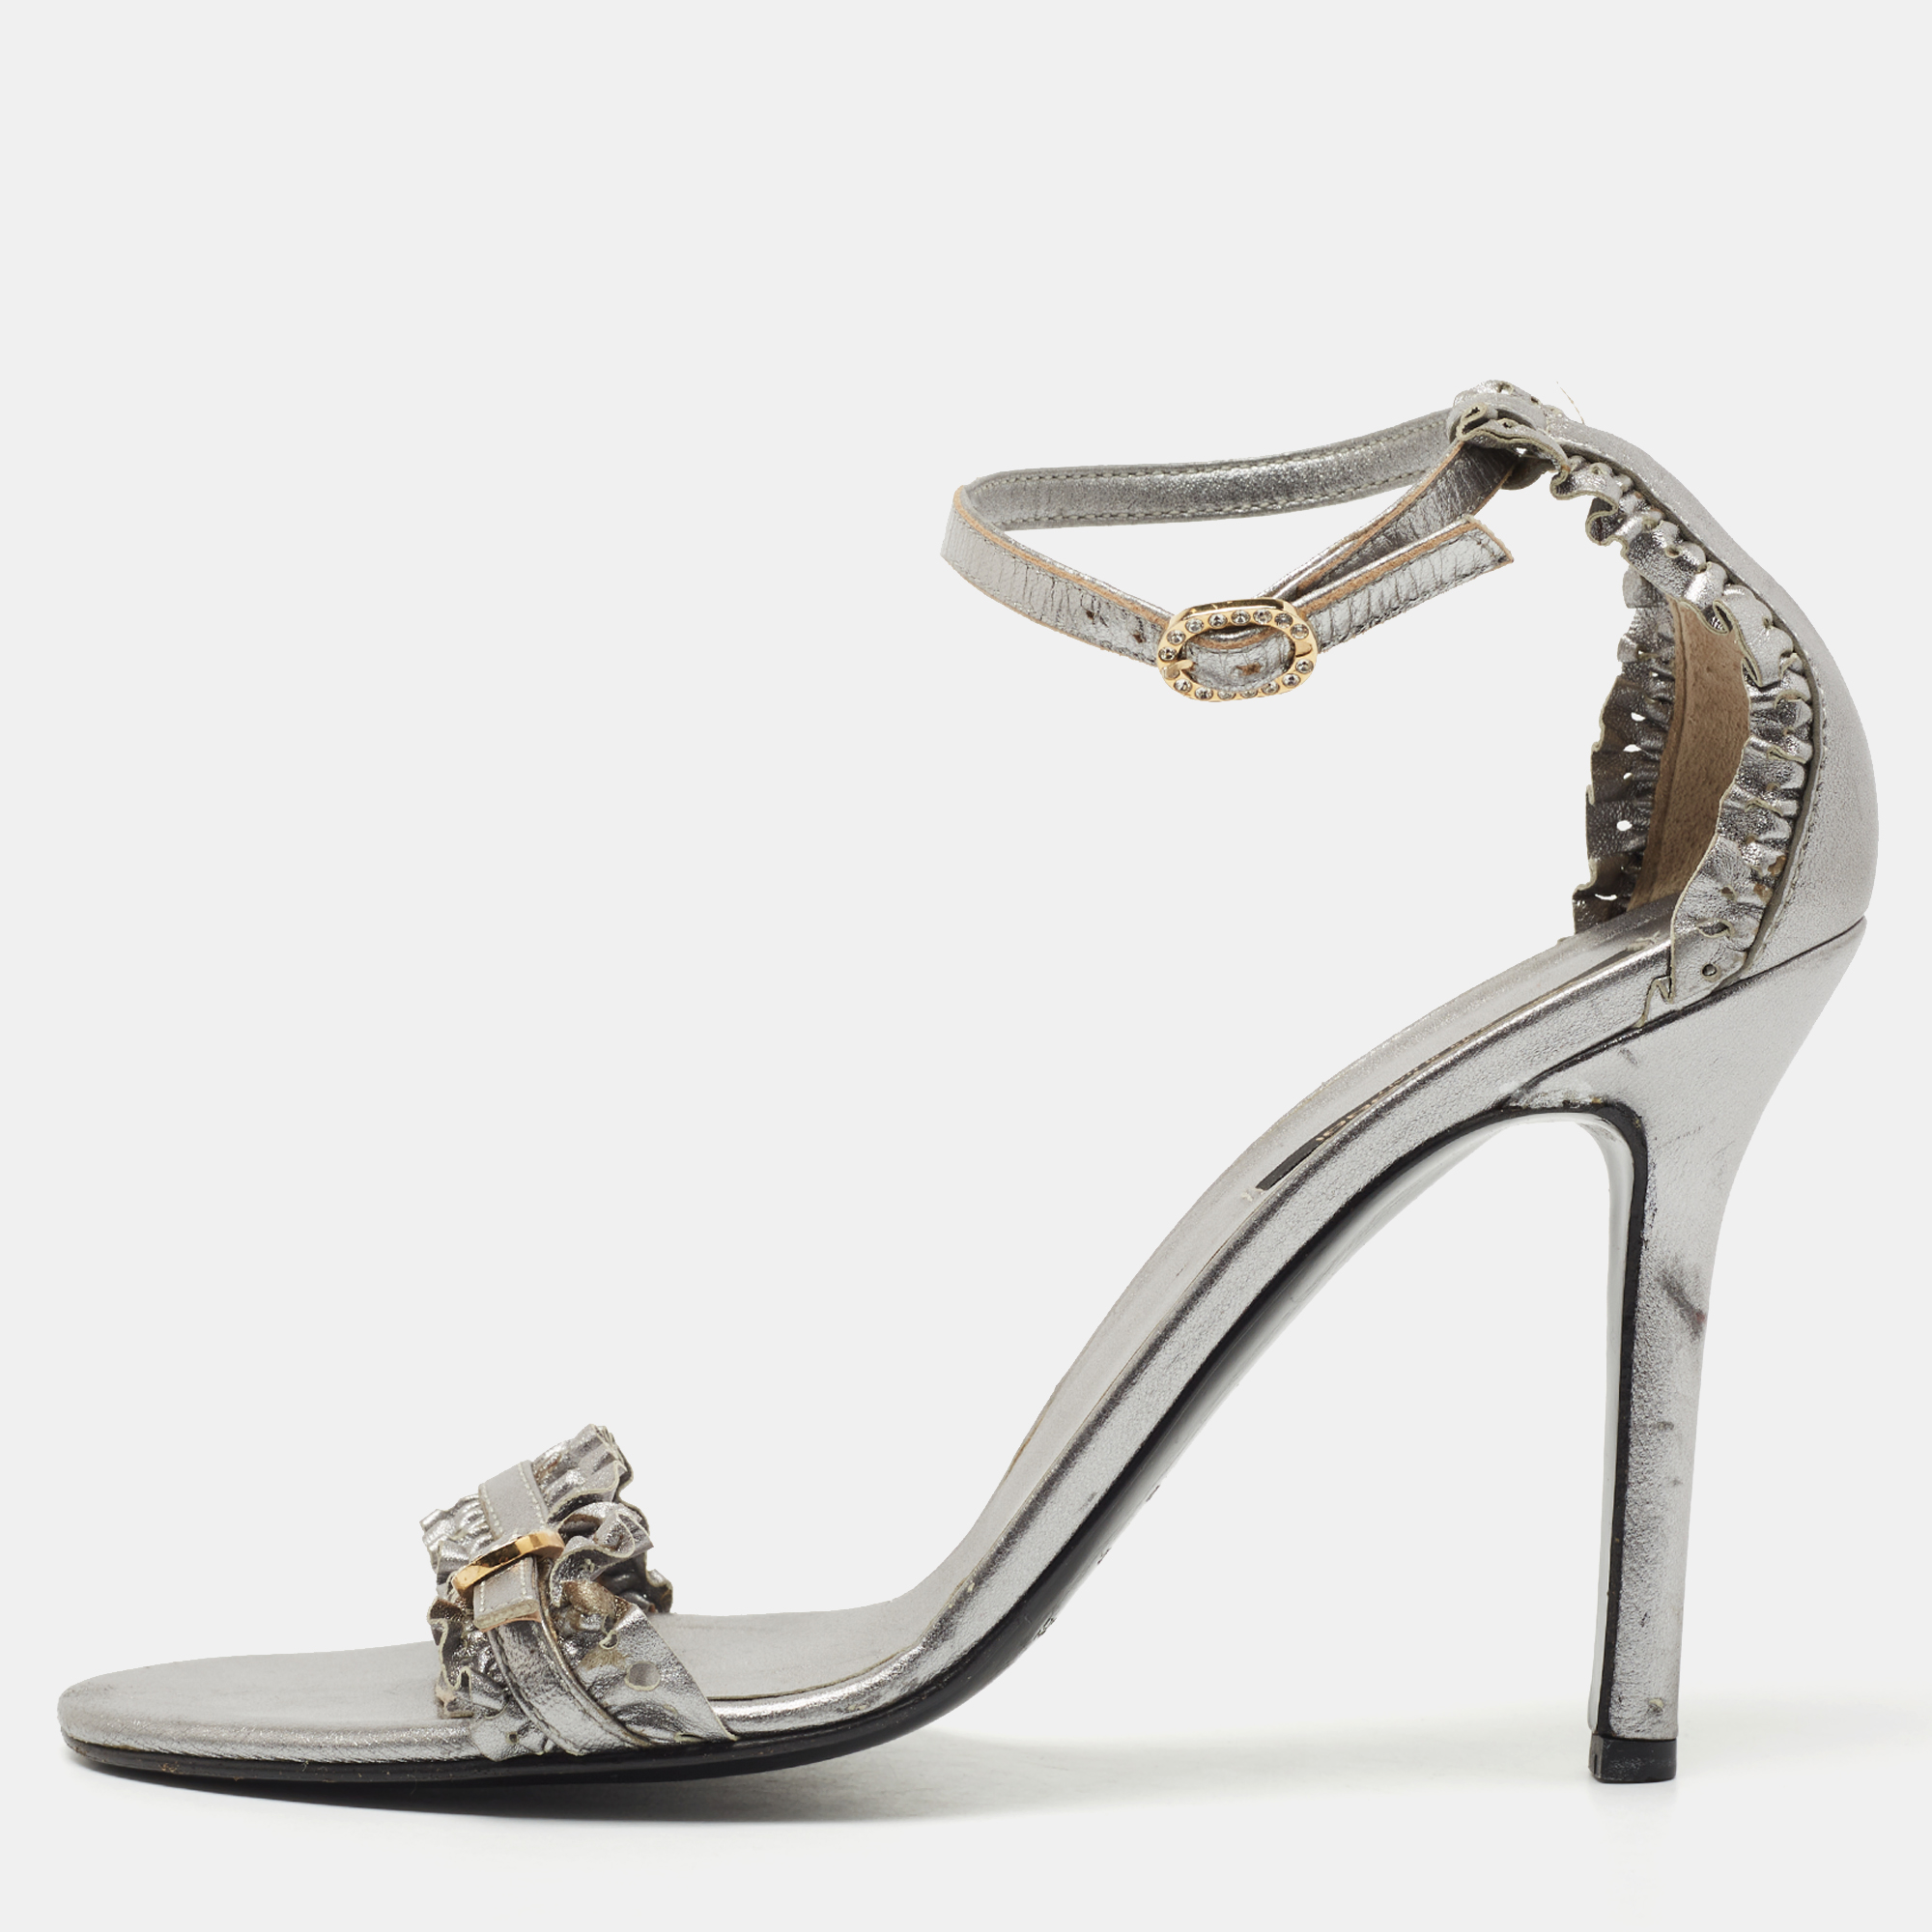 Pre-owned Sergio Rossi Metallic Grey Ruffle Leather Ankle Strap Sandals Size 40